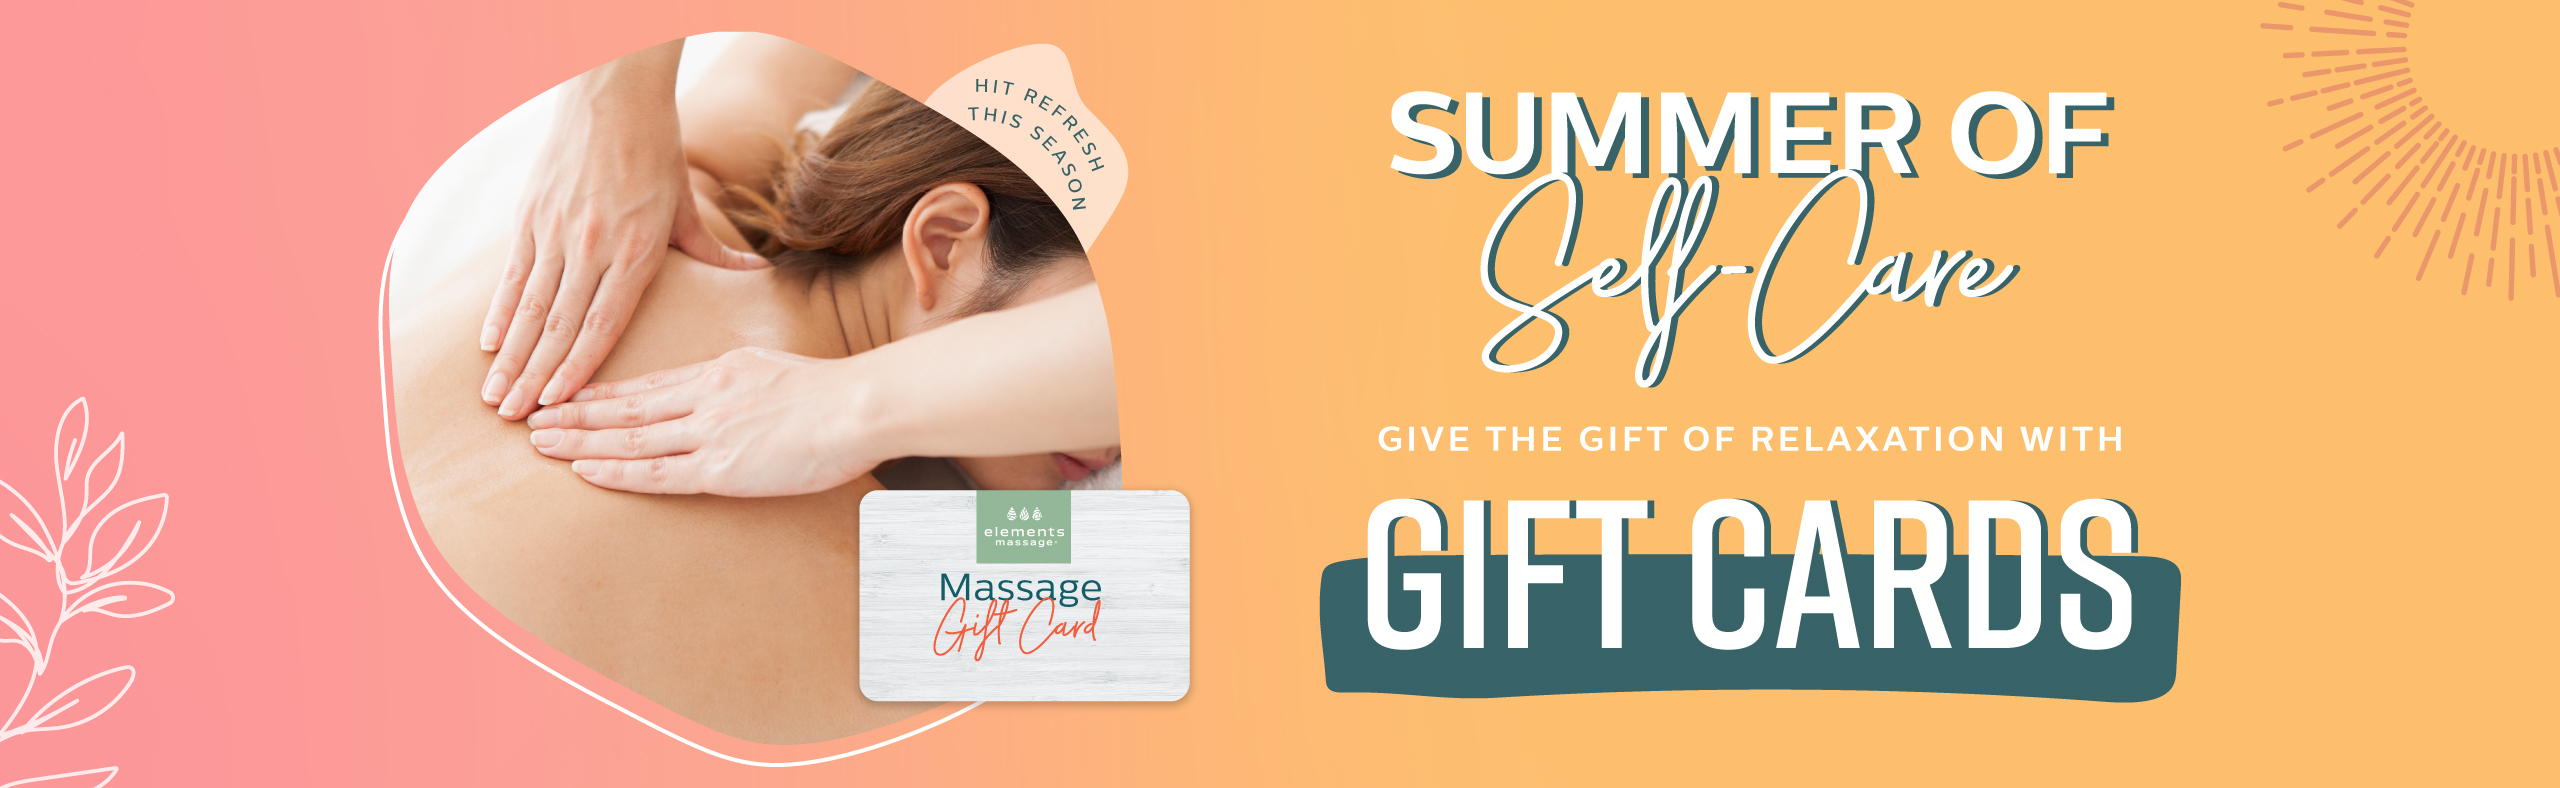 Summer of self care: give the gift of relaxation with gift cards!